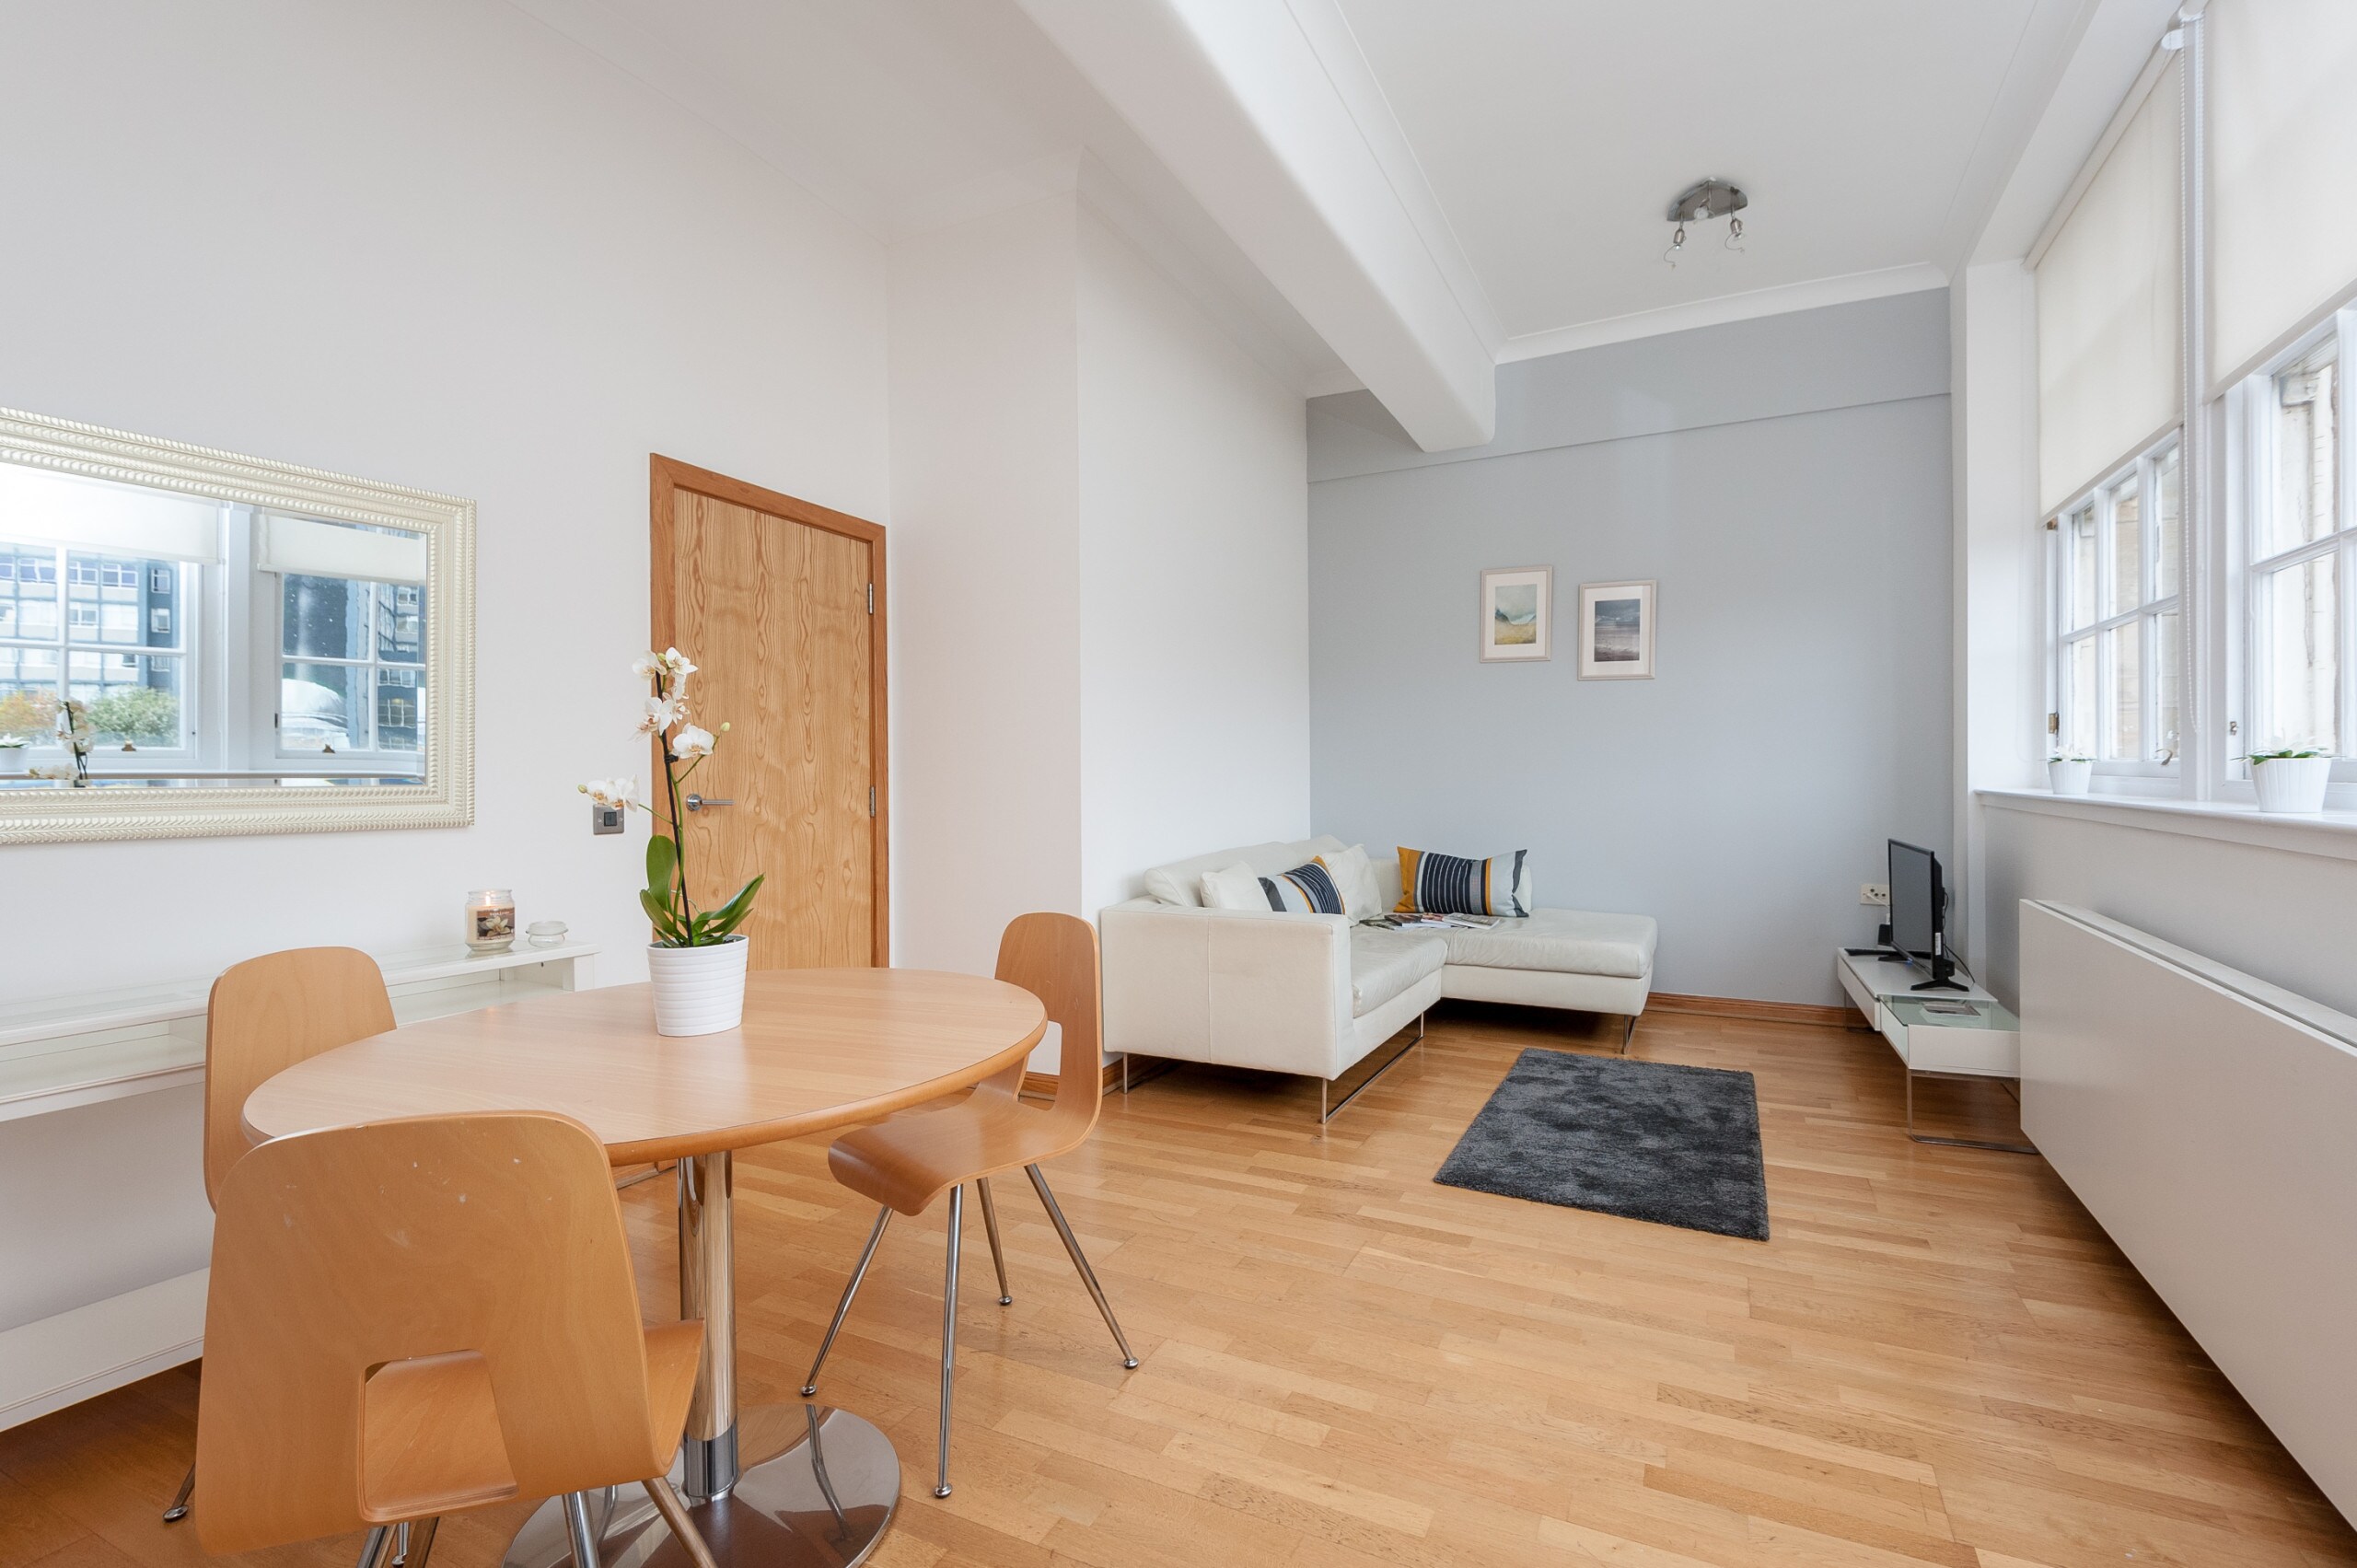 Property Image 1 - Cute stylish apartment located in the Merchant City